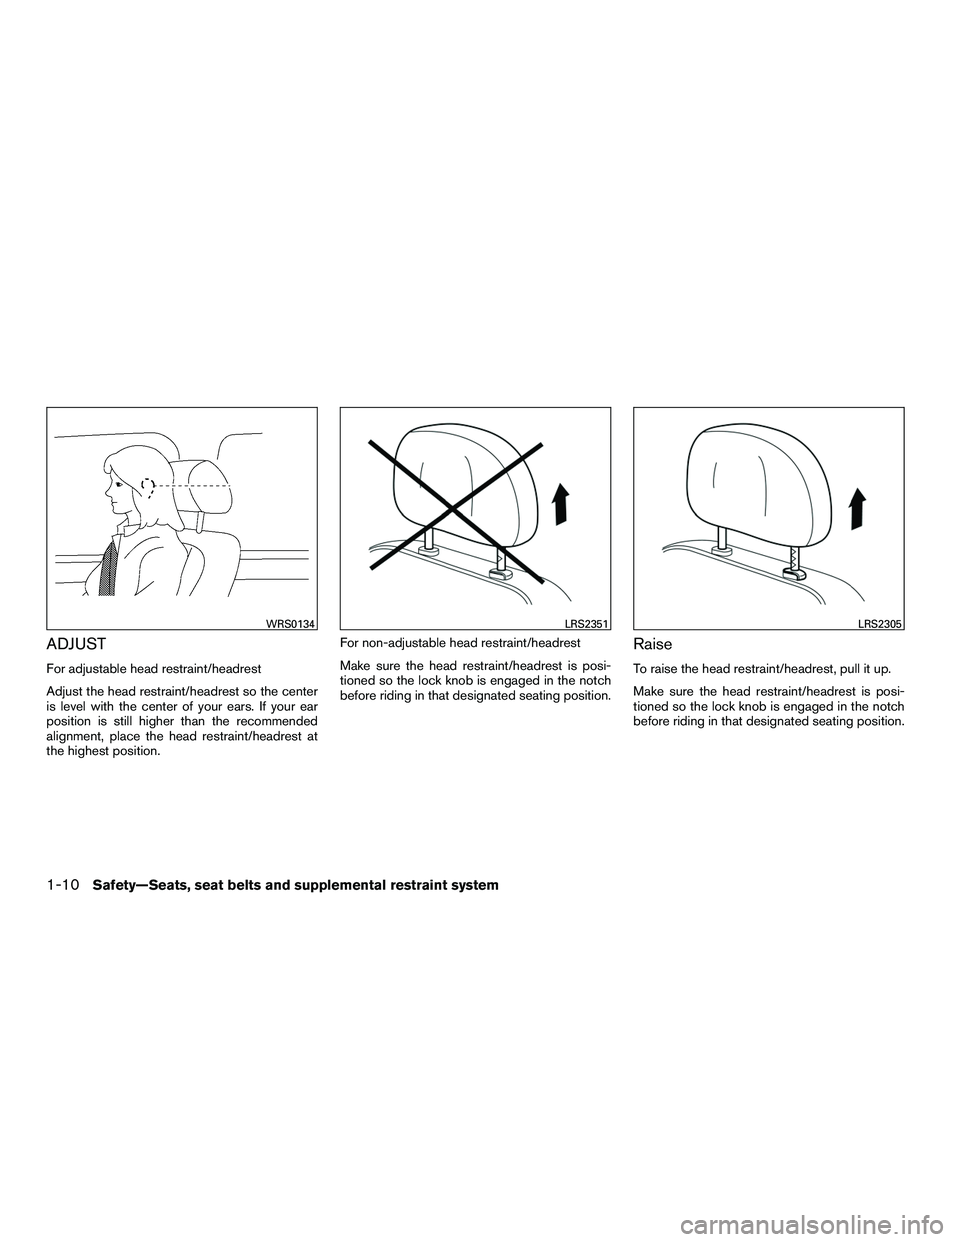 NISSAN NV200 2016 Owners Manual ADJUST
For adjustable head restraint/headrest
Adjust the head restraint/headrest so the center
is level with the center of your ears. If your ear
position is still higher than the recommended
alignmen